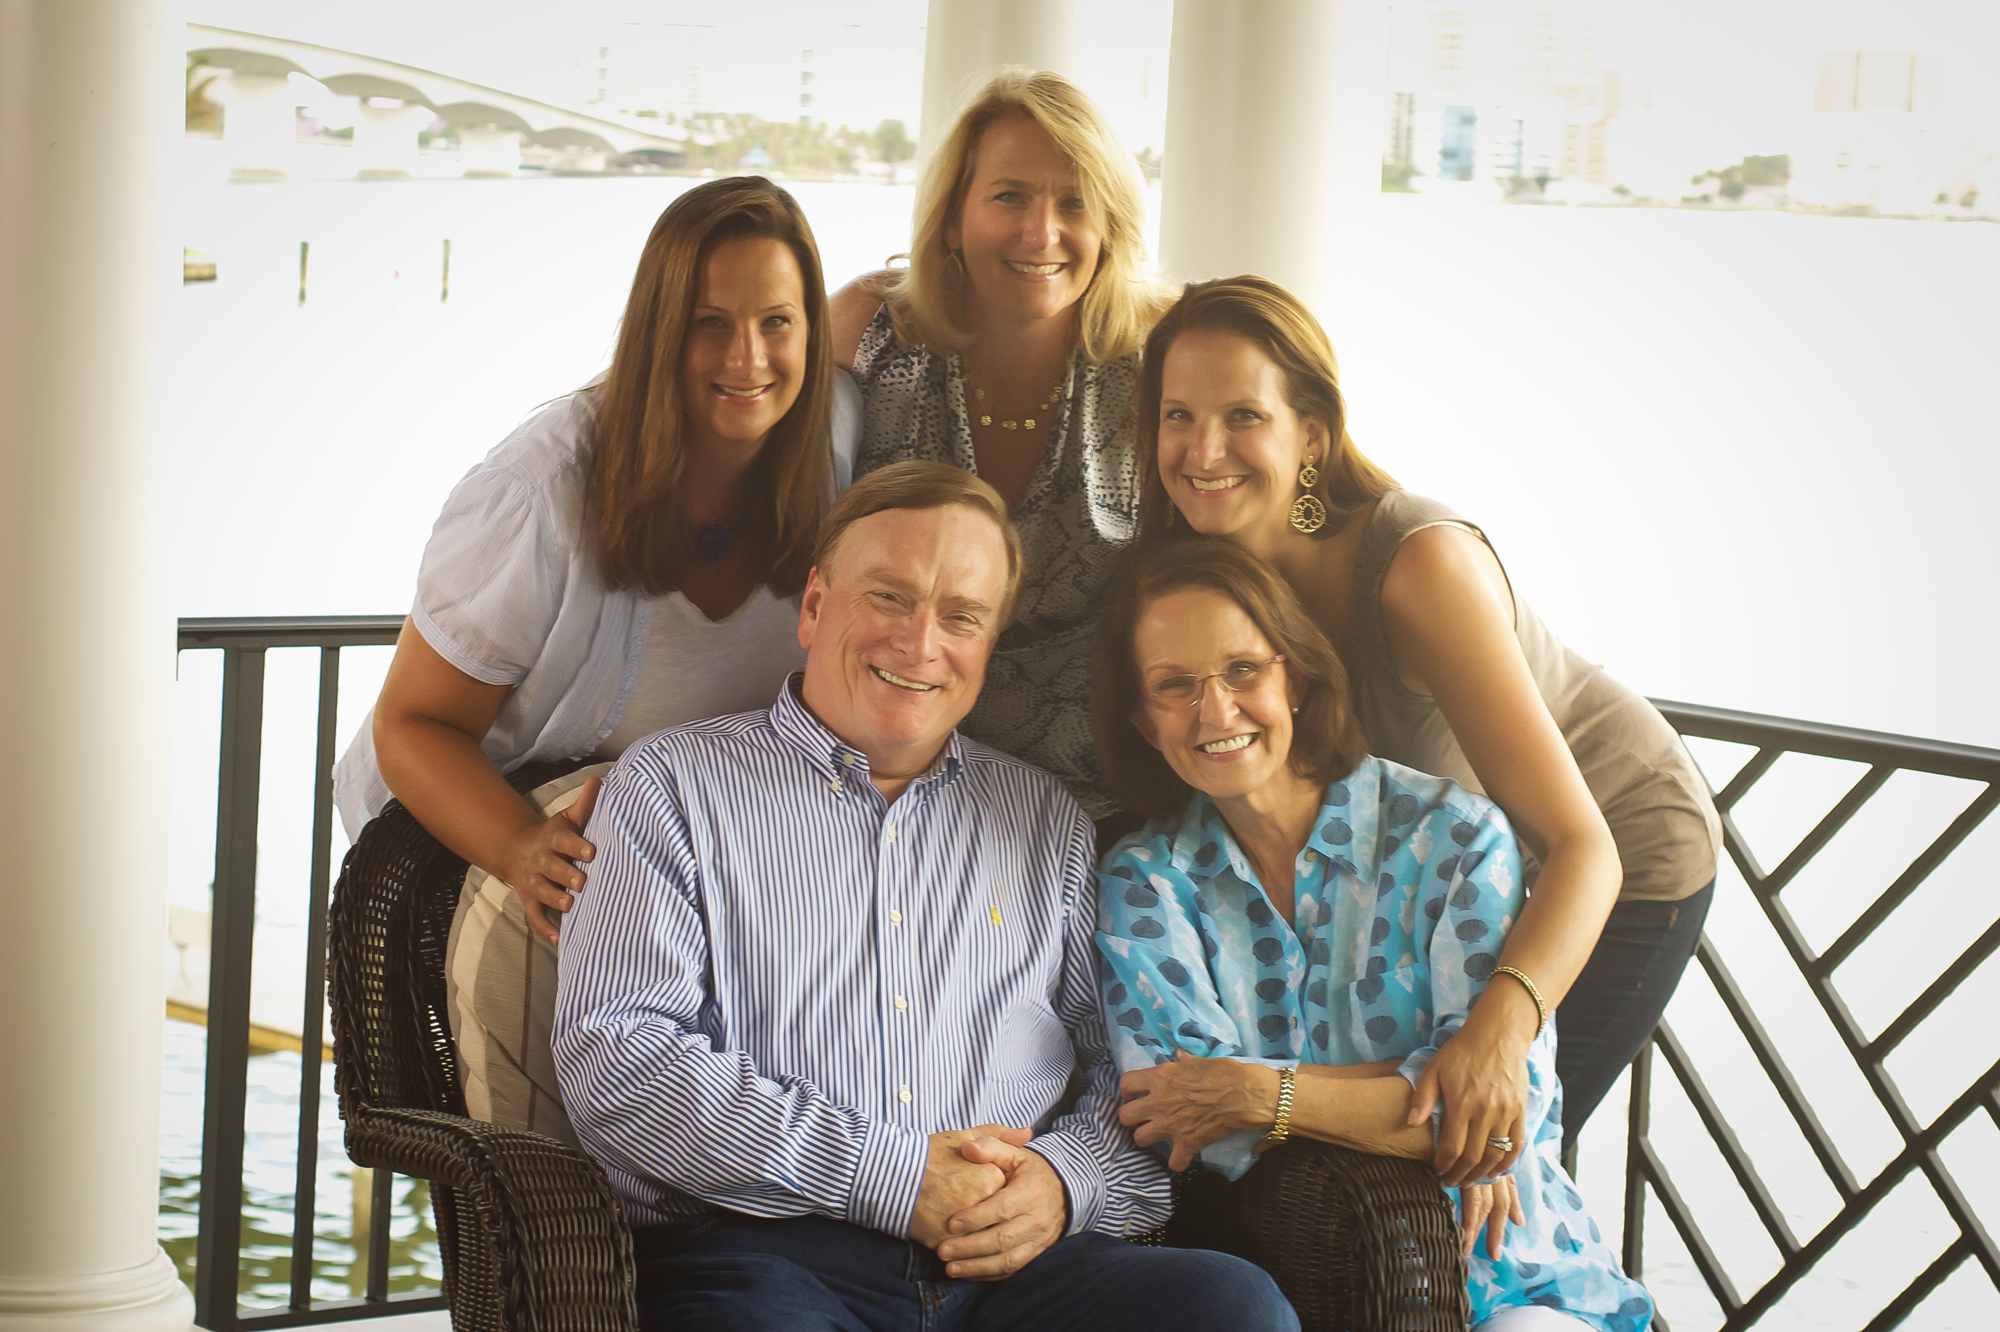 Courtesy.  The Jellison Family Foundation was created by Sarasota residents Brian and Sheila Jellison with their three daughters, Christie Jellison Mucha, Hilary Jellison Simonds and Michelle Jellison, in 2018,